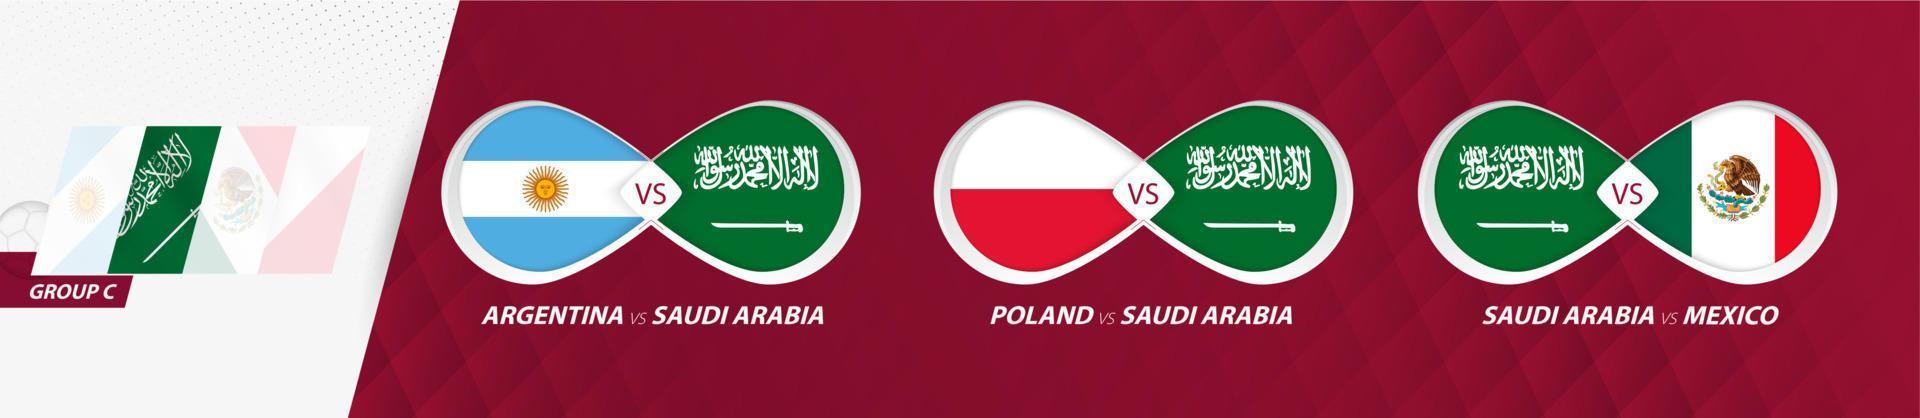 Saudi Arabia national team matches in group C, football competition 2022, all games icon in group stage. vector